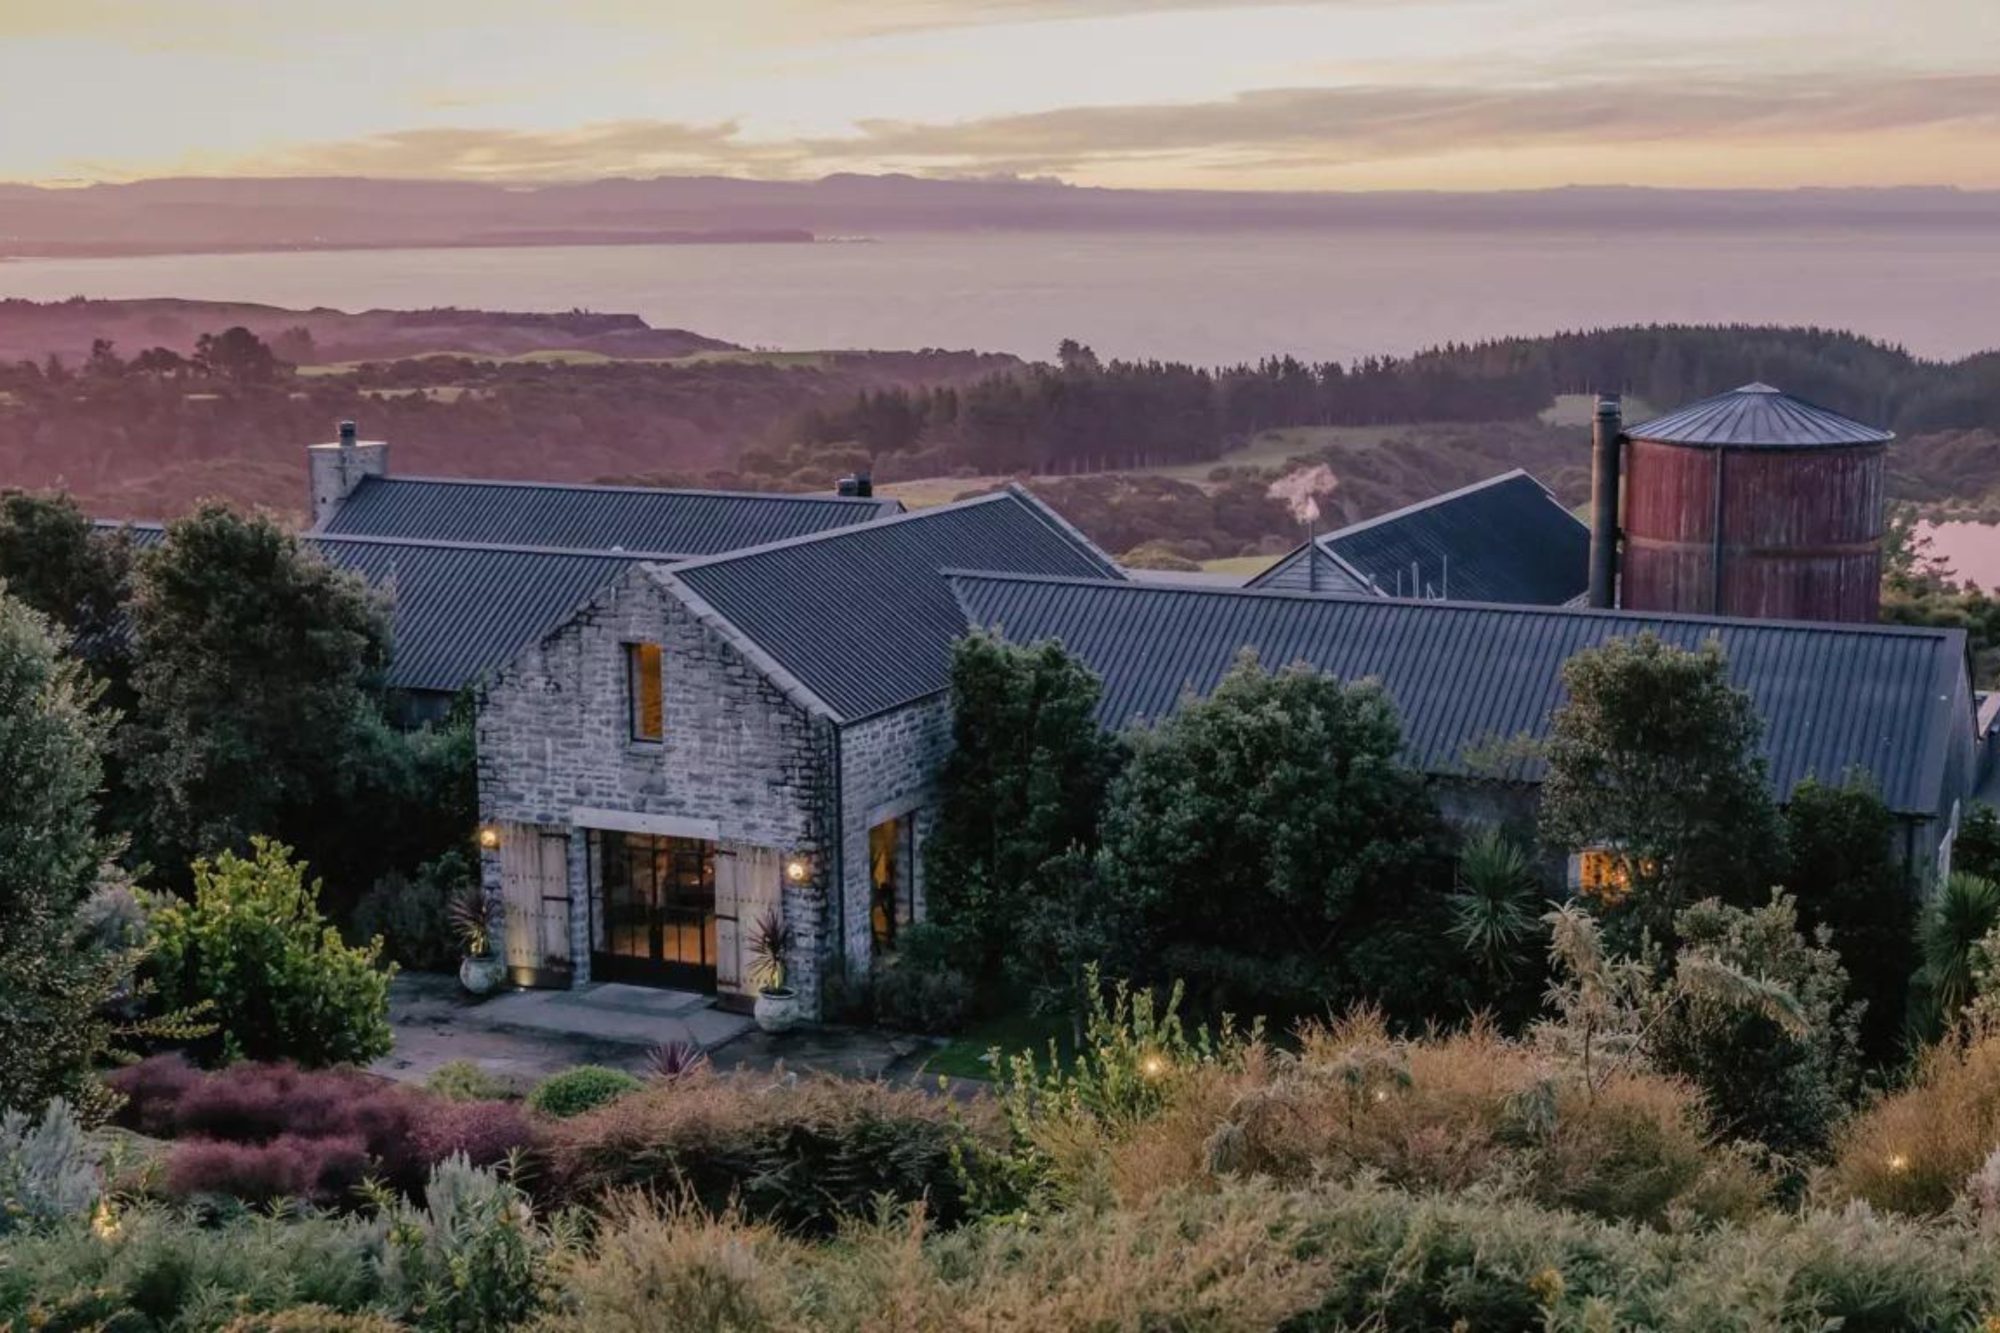 Rosewood’s Robertson Lodges: A distinguished collection of three resorts in New Zealand